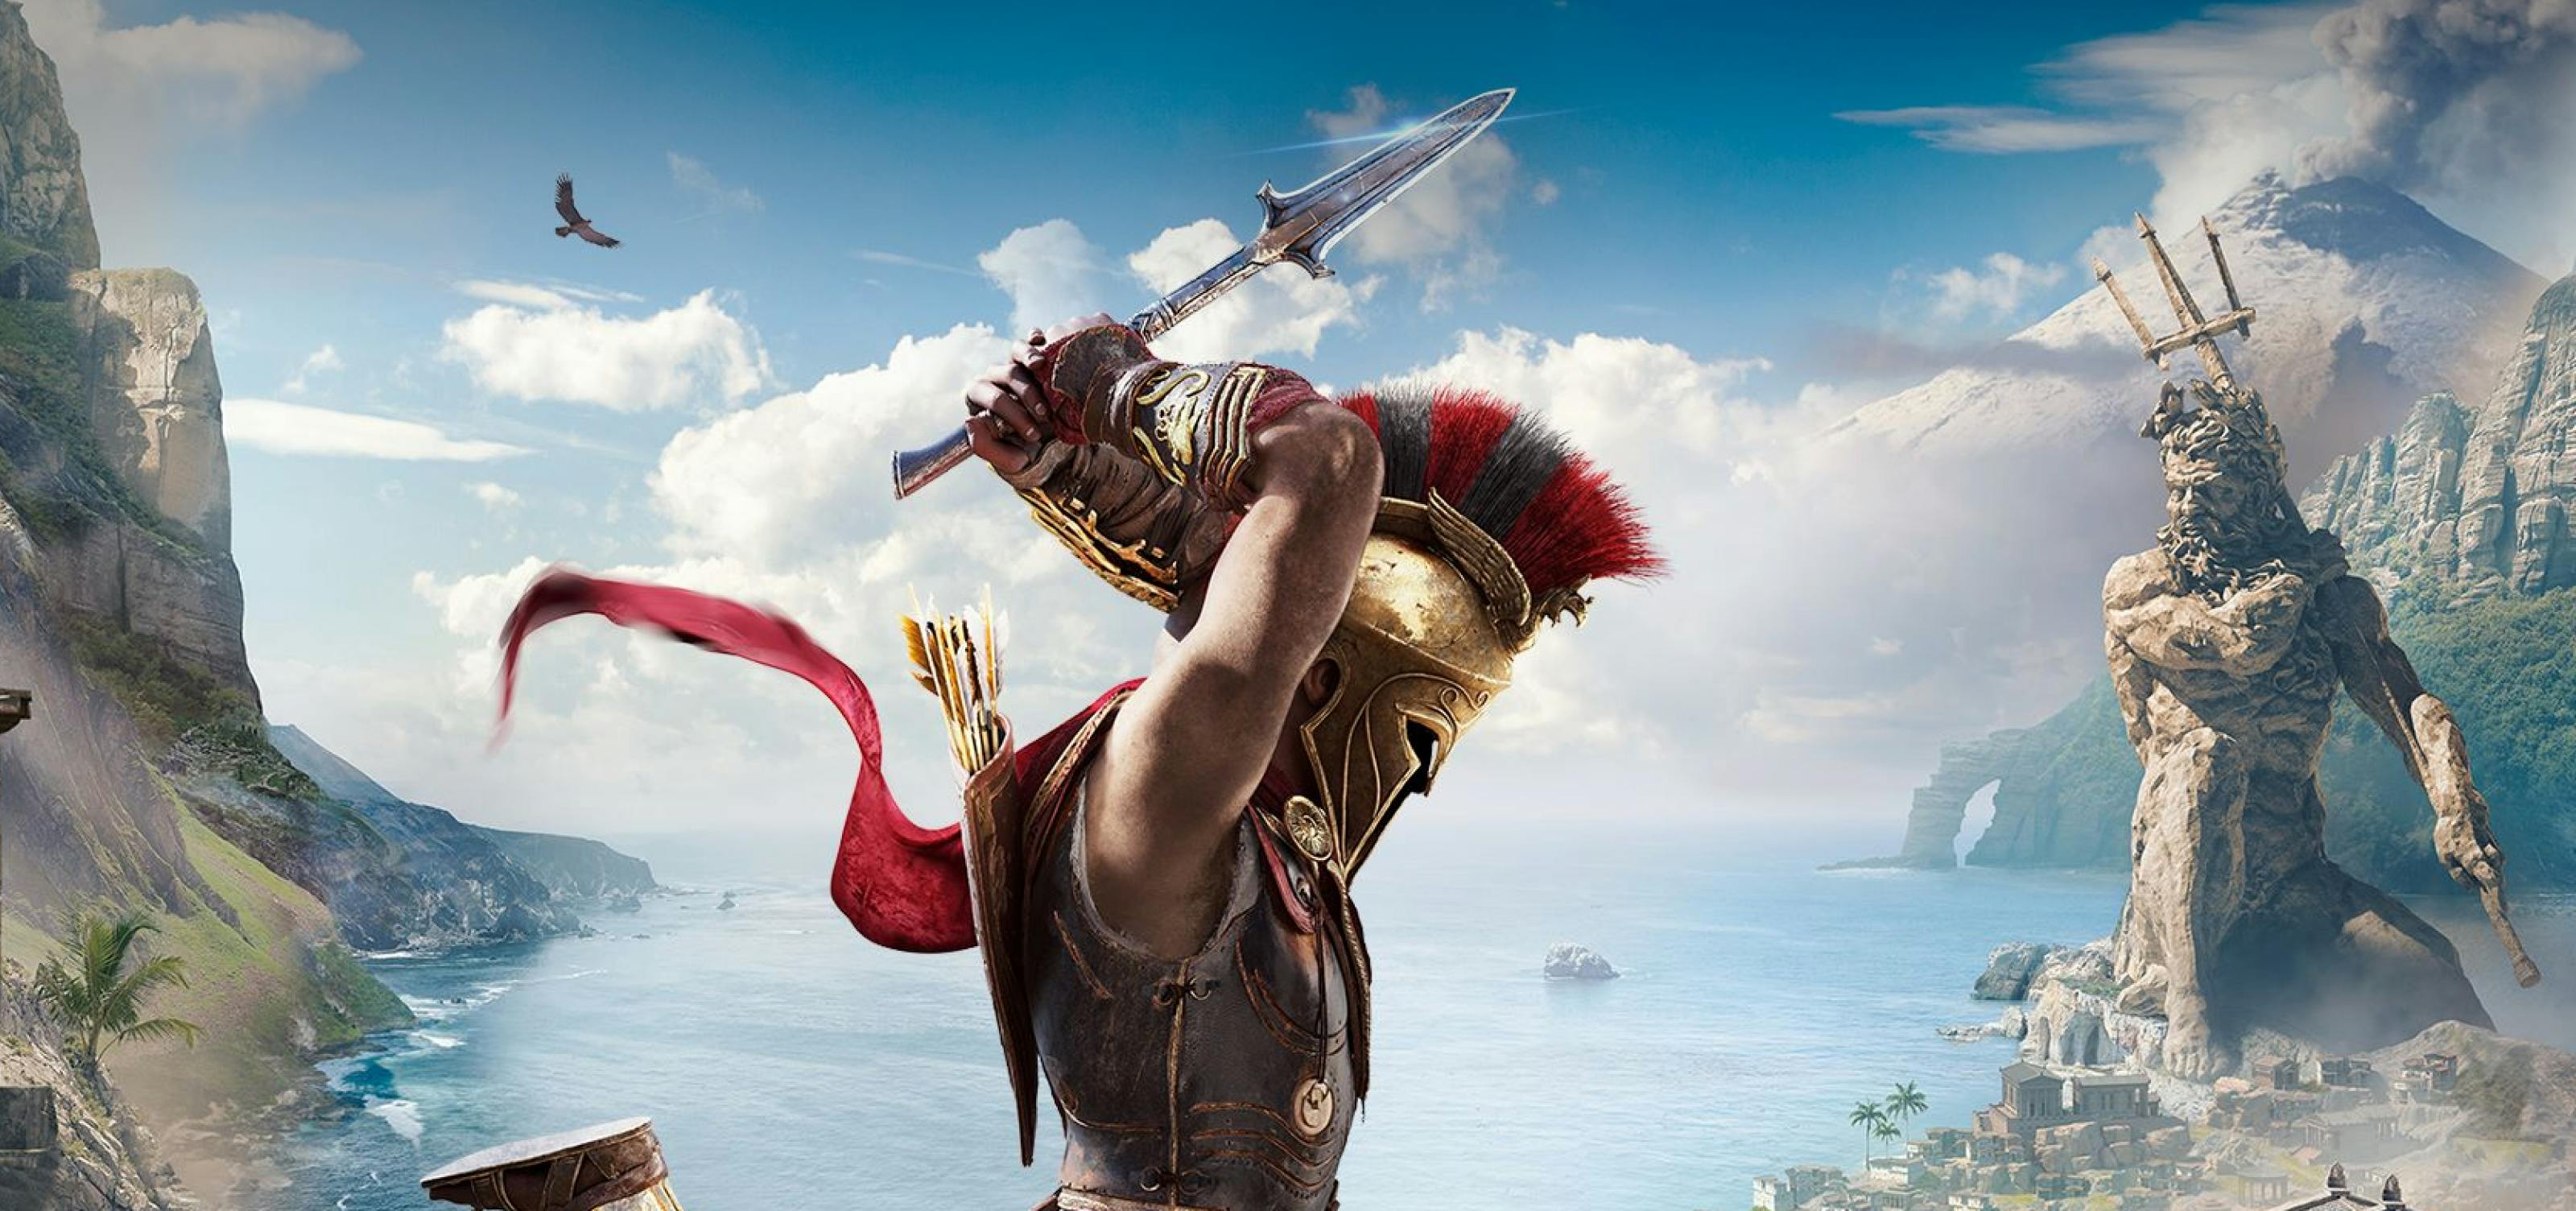 Assassin's Creed Odyssey soldier